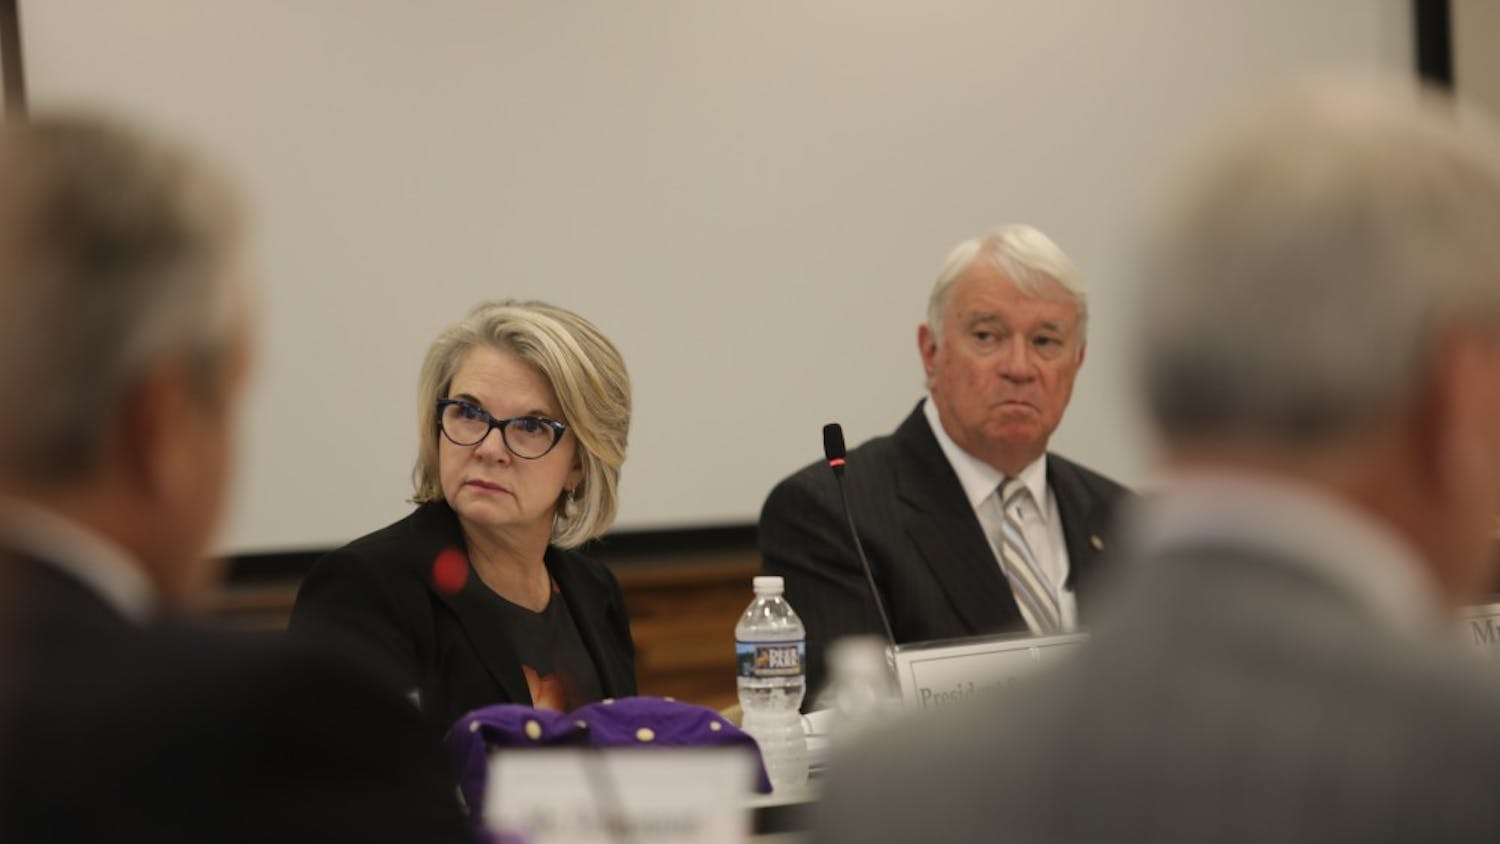 UNC-system President Margaret Spellings (left) sits next to chairperson Lou Bissette (right) during a September 2017 UNC Board of Governors meeting.